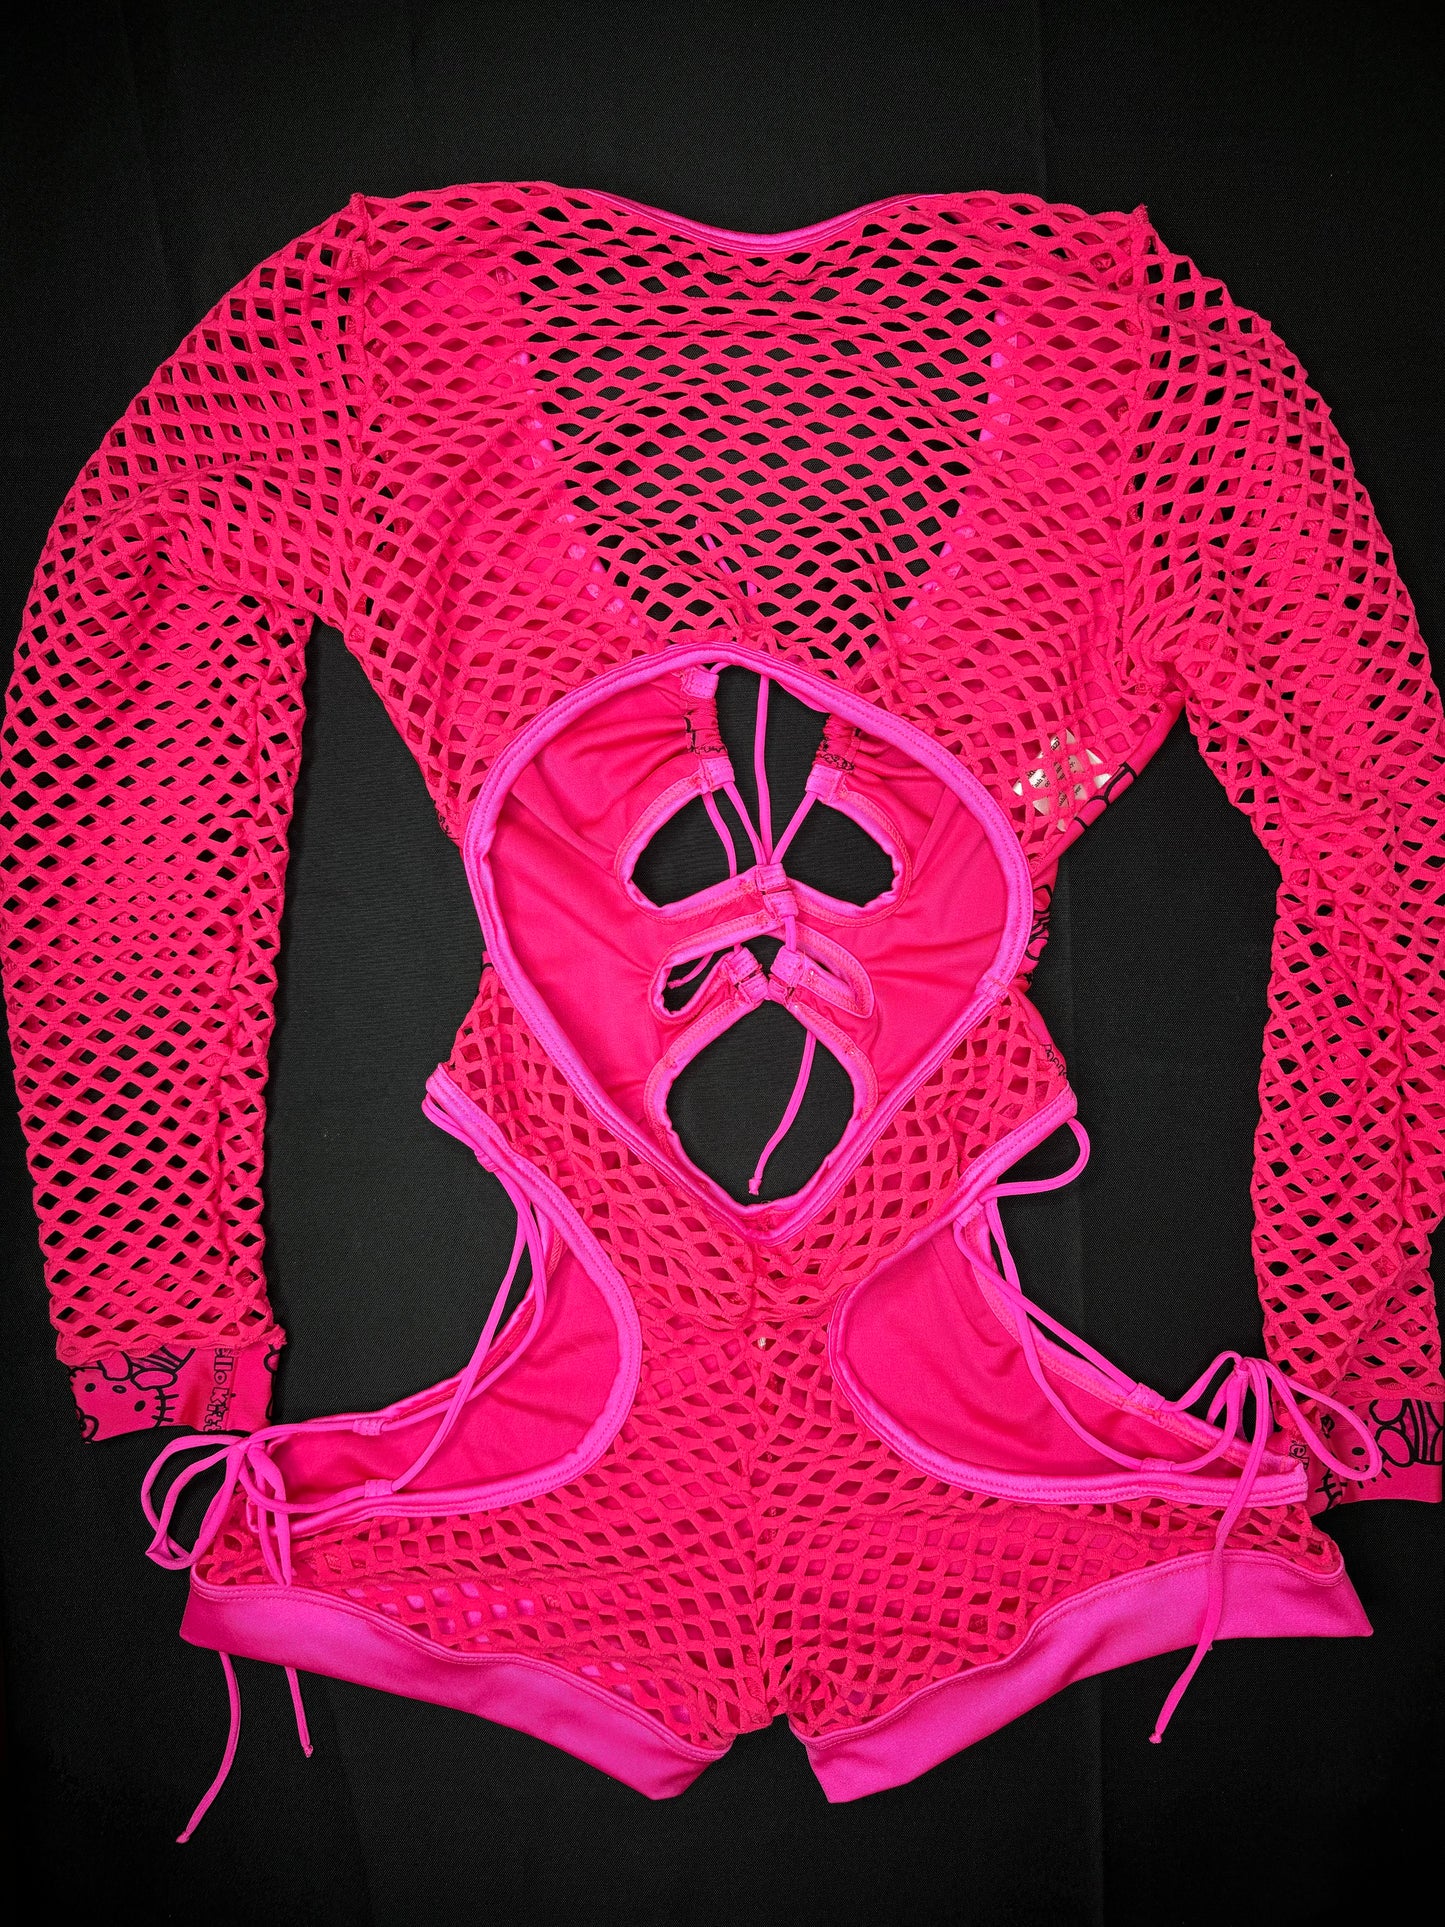 Hot Pink/Pink Kitty One-Piece Romper Lingerie Outfit